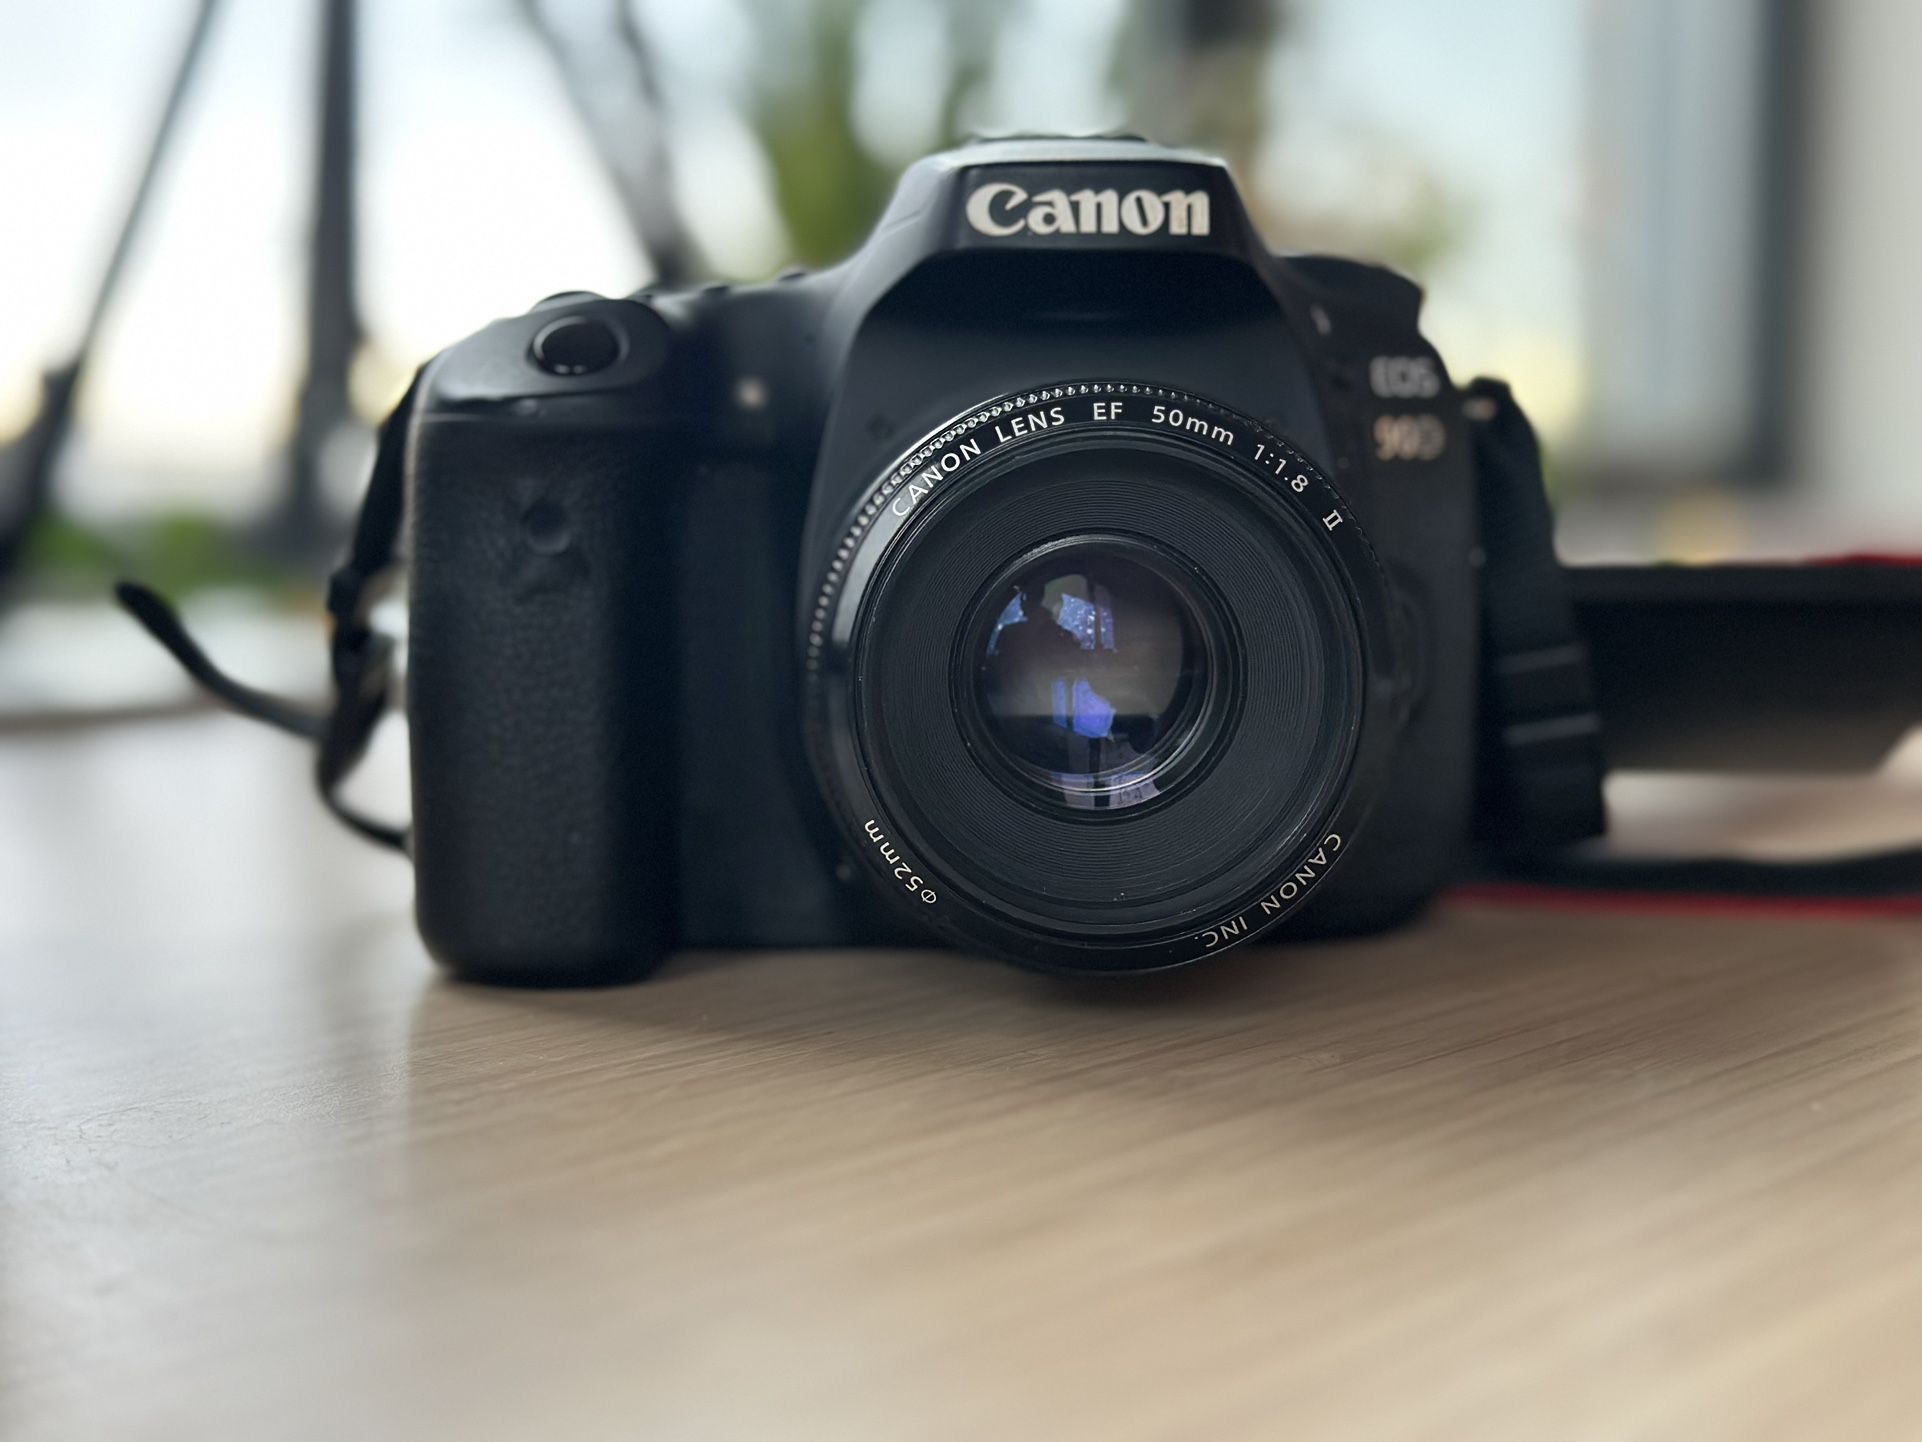 Canon EOS 90d and 50mm pf 1.8 prime lens